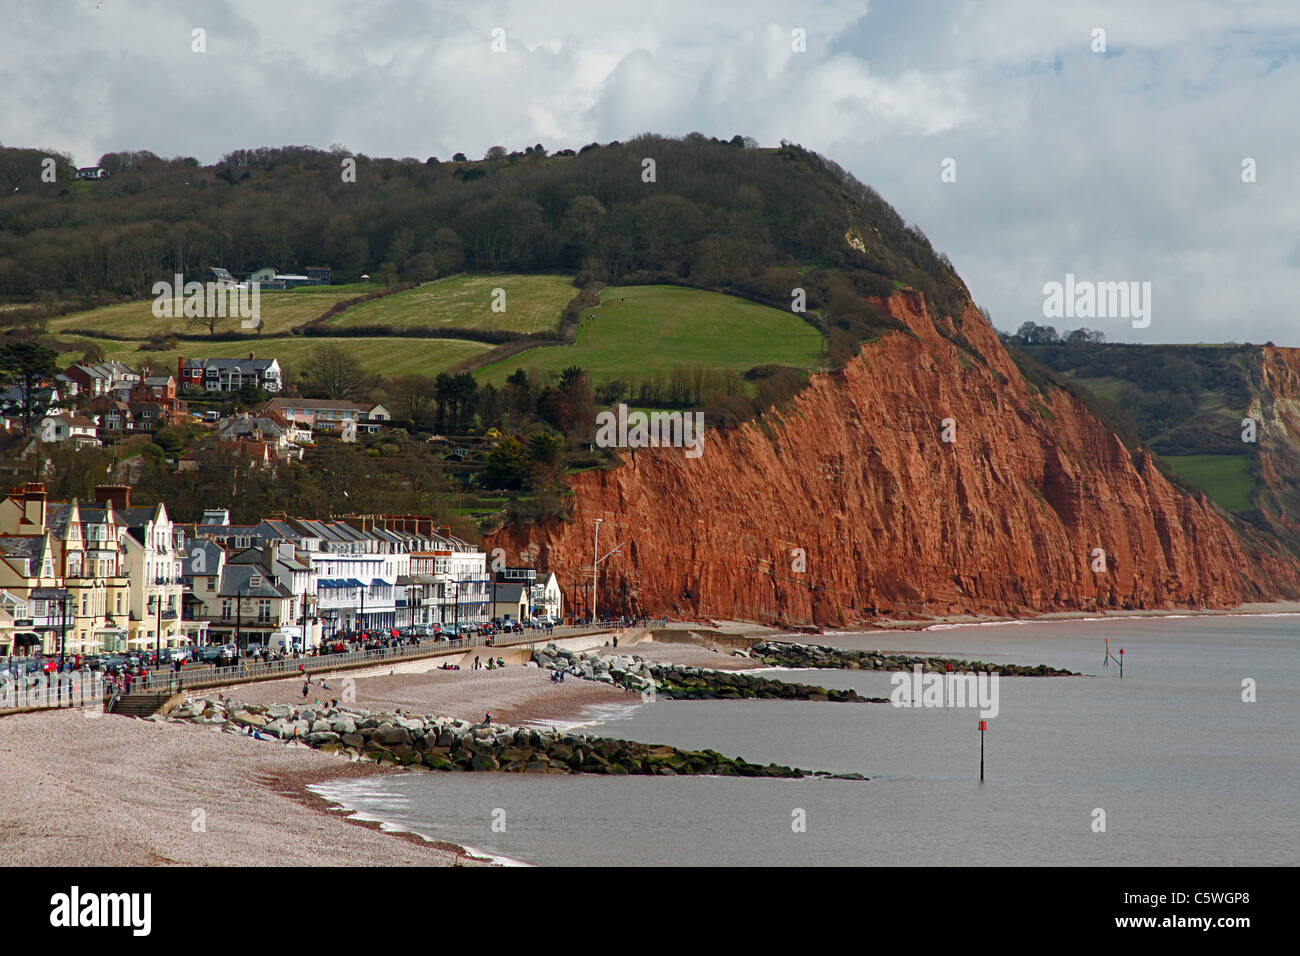 Red sandstone cliffs, forming part of the Jurassic Coast, at Sidmouth, Devon, England, UK Stock Photo